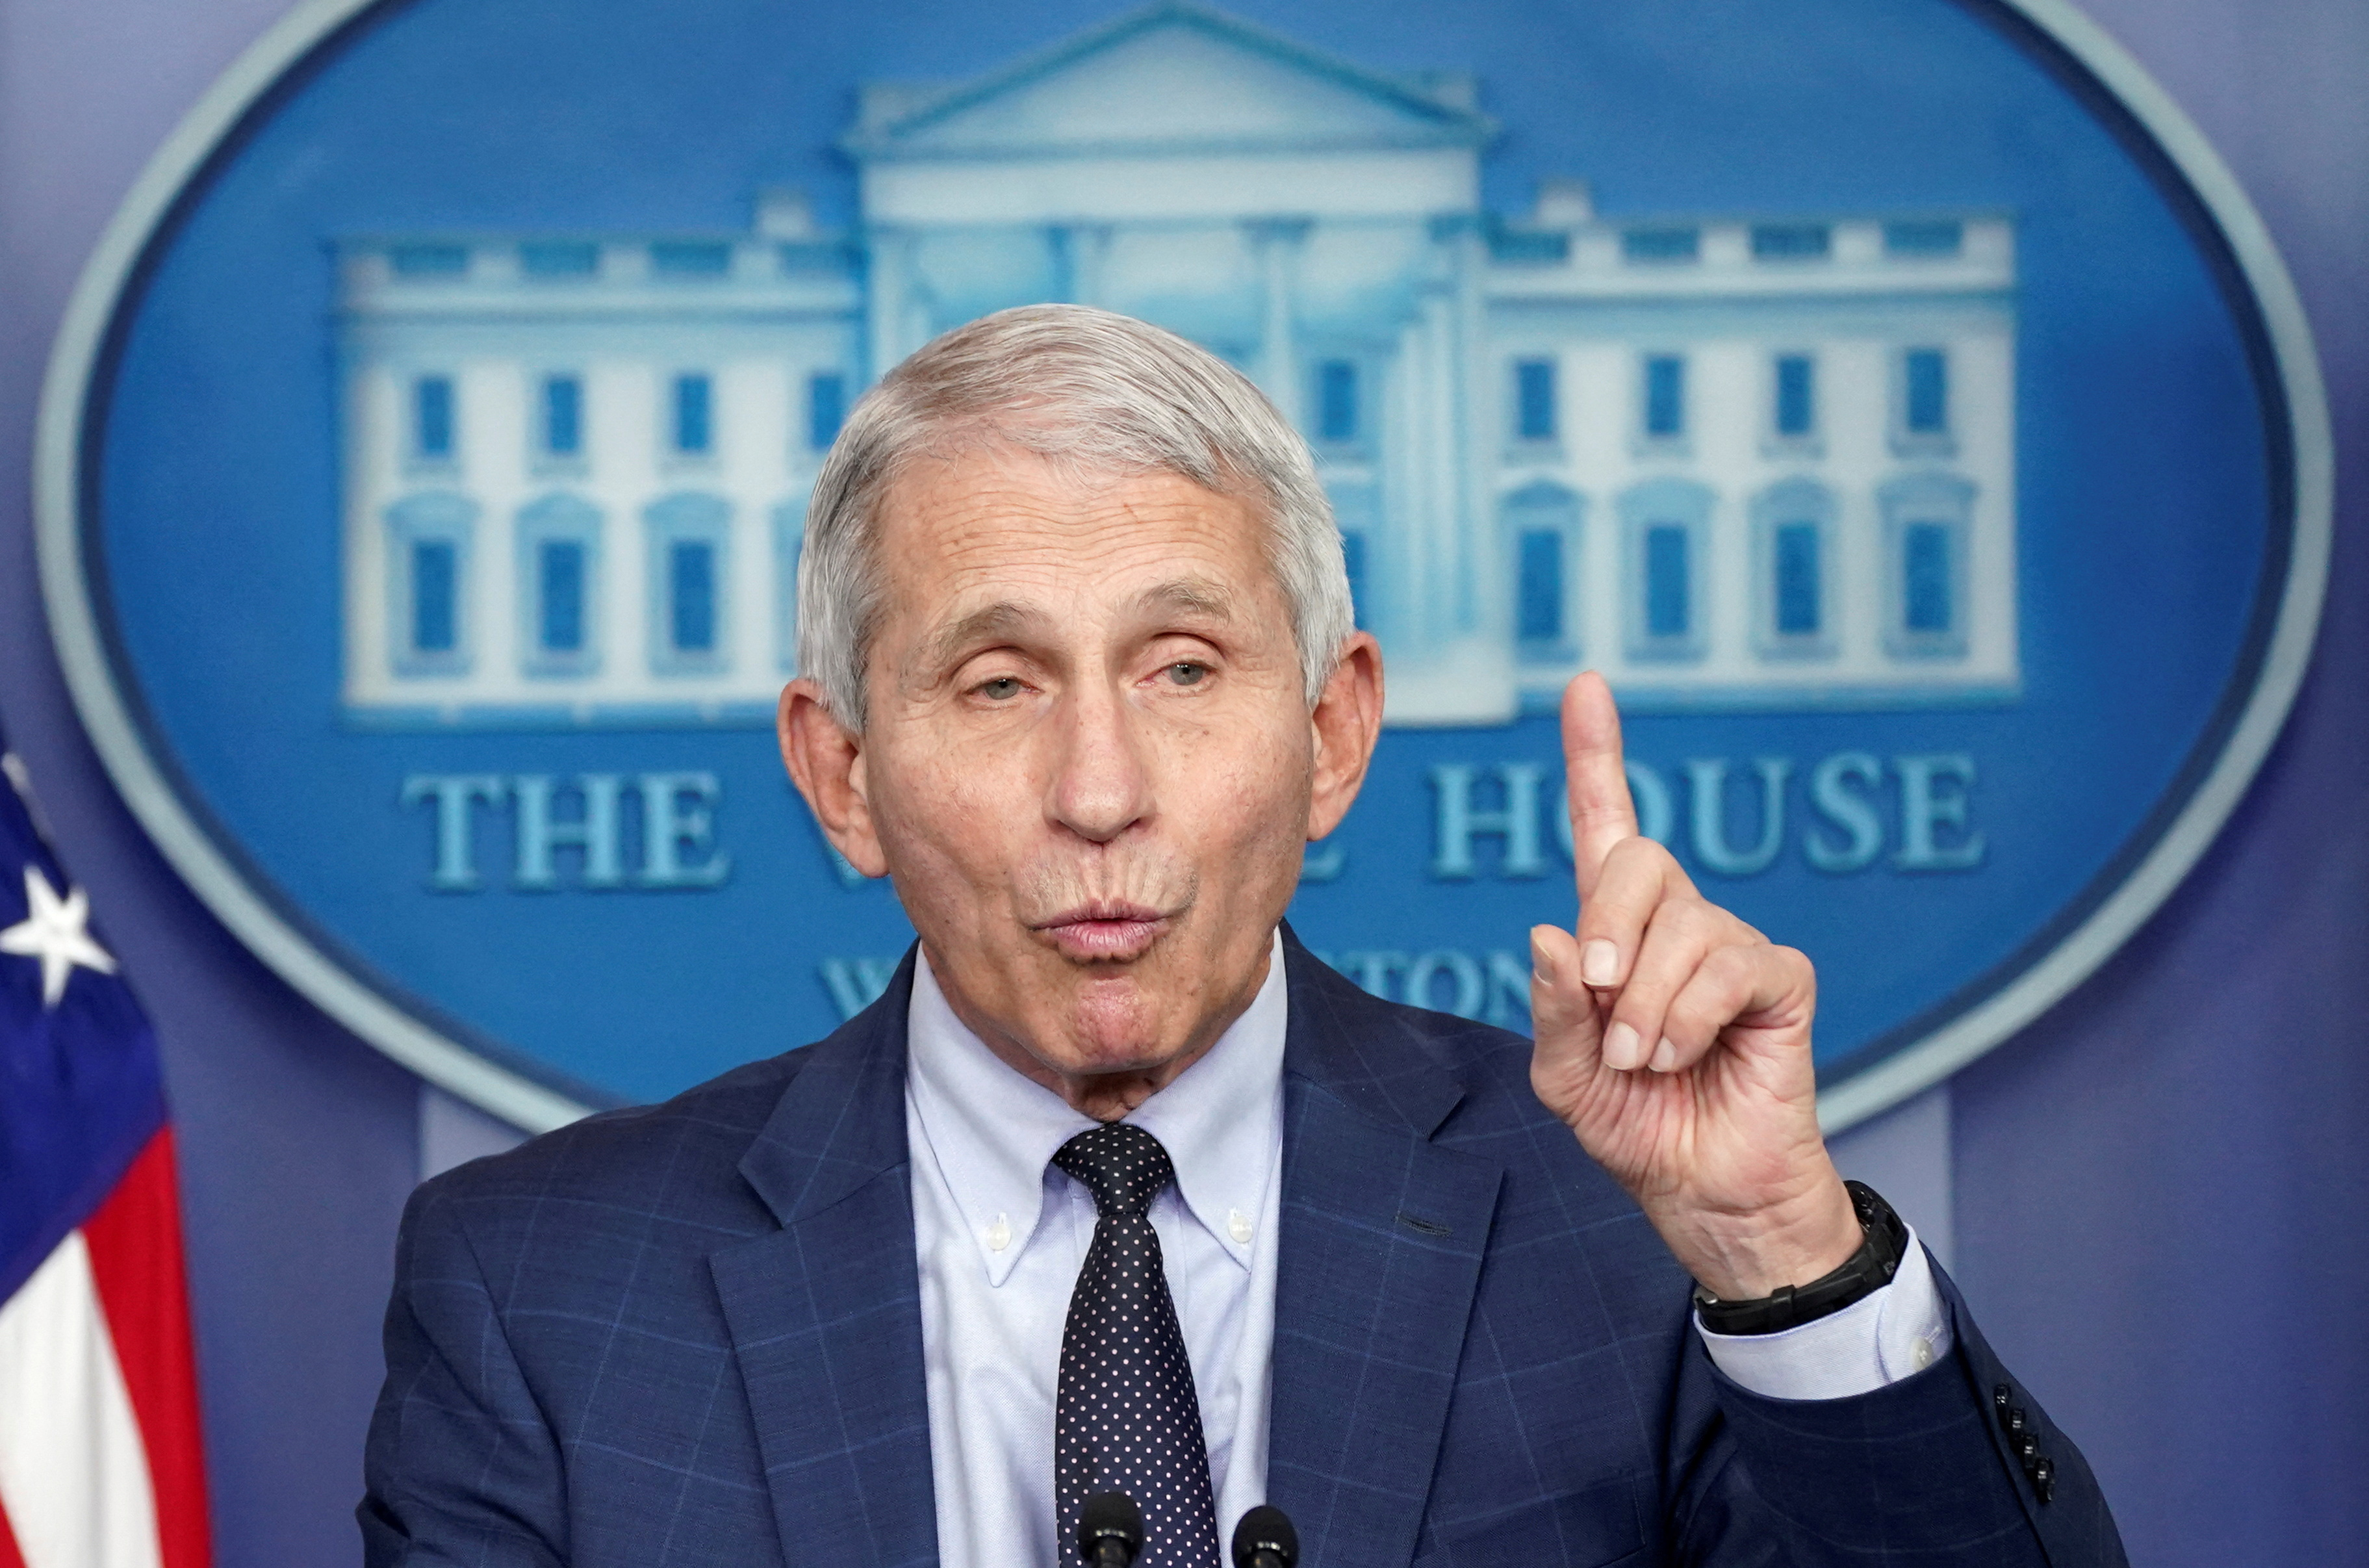 Fauci speaks during a press briefing at the White House in Washington